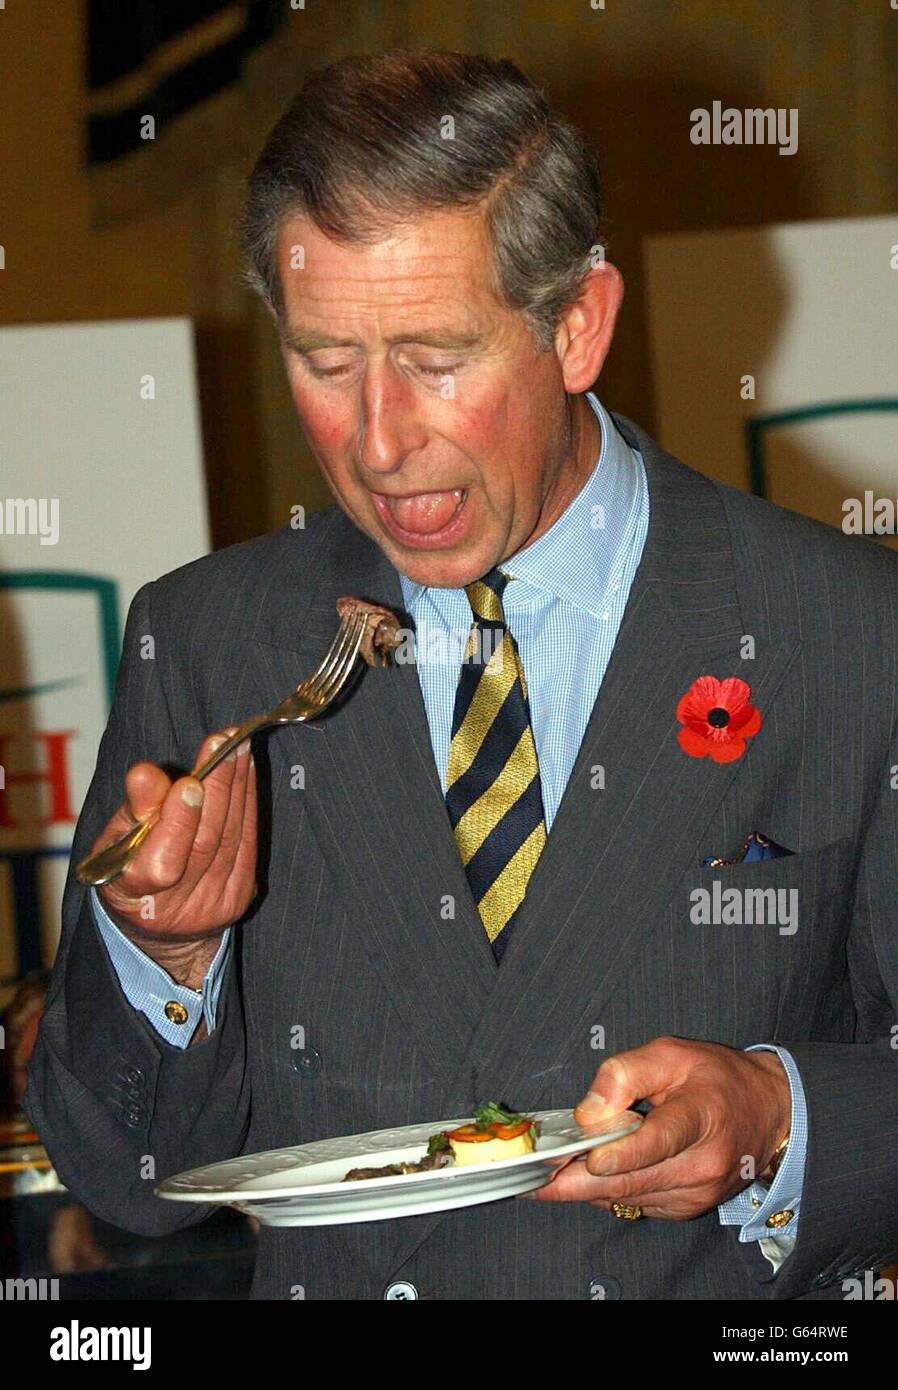 The Prince of Wales samples some beef at a British beef promotion reception at the Hotel Parco dei Principi, in Rome. It was the second day of Prince Charles official cultural tour in Italy, which also takes in Naples. Stock Photo